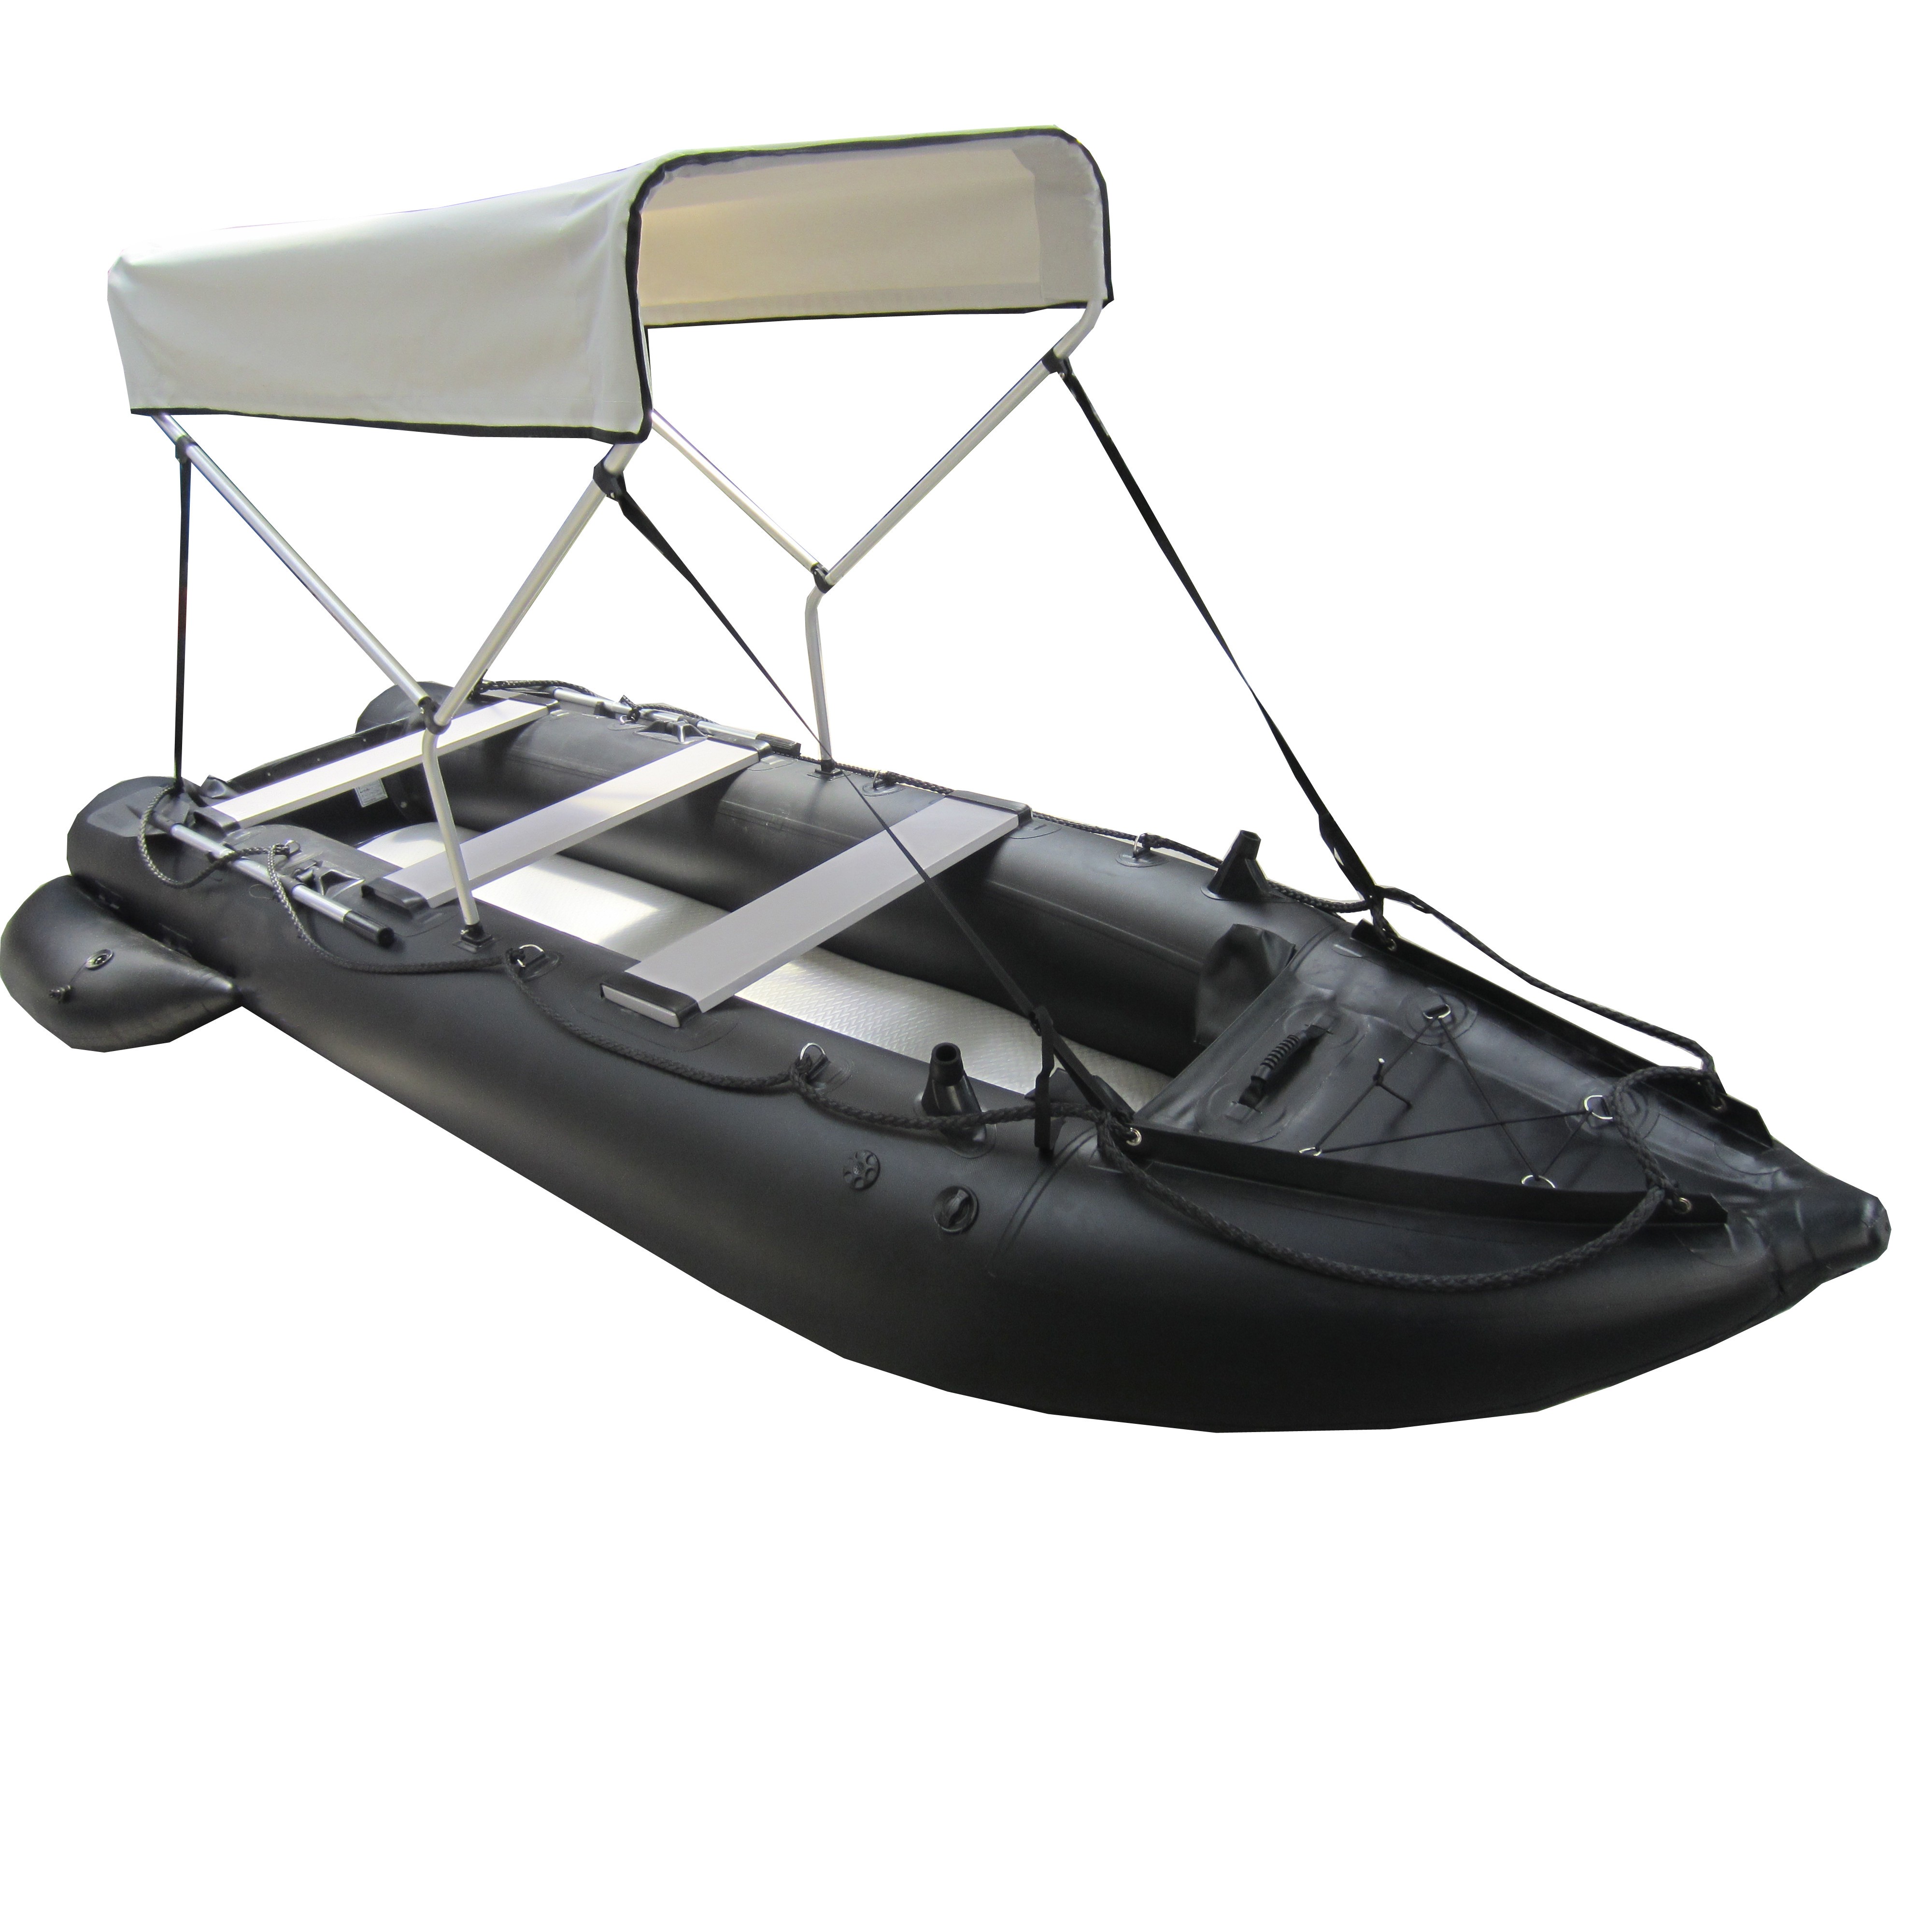 Inflatable kayak in the sea